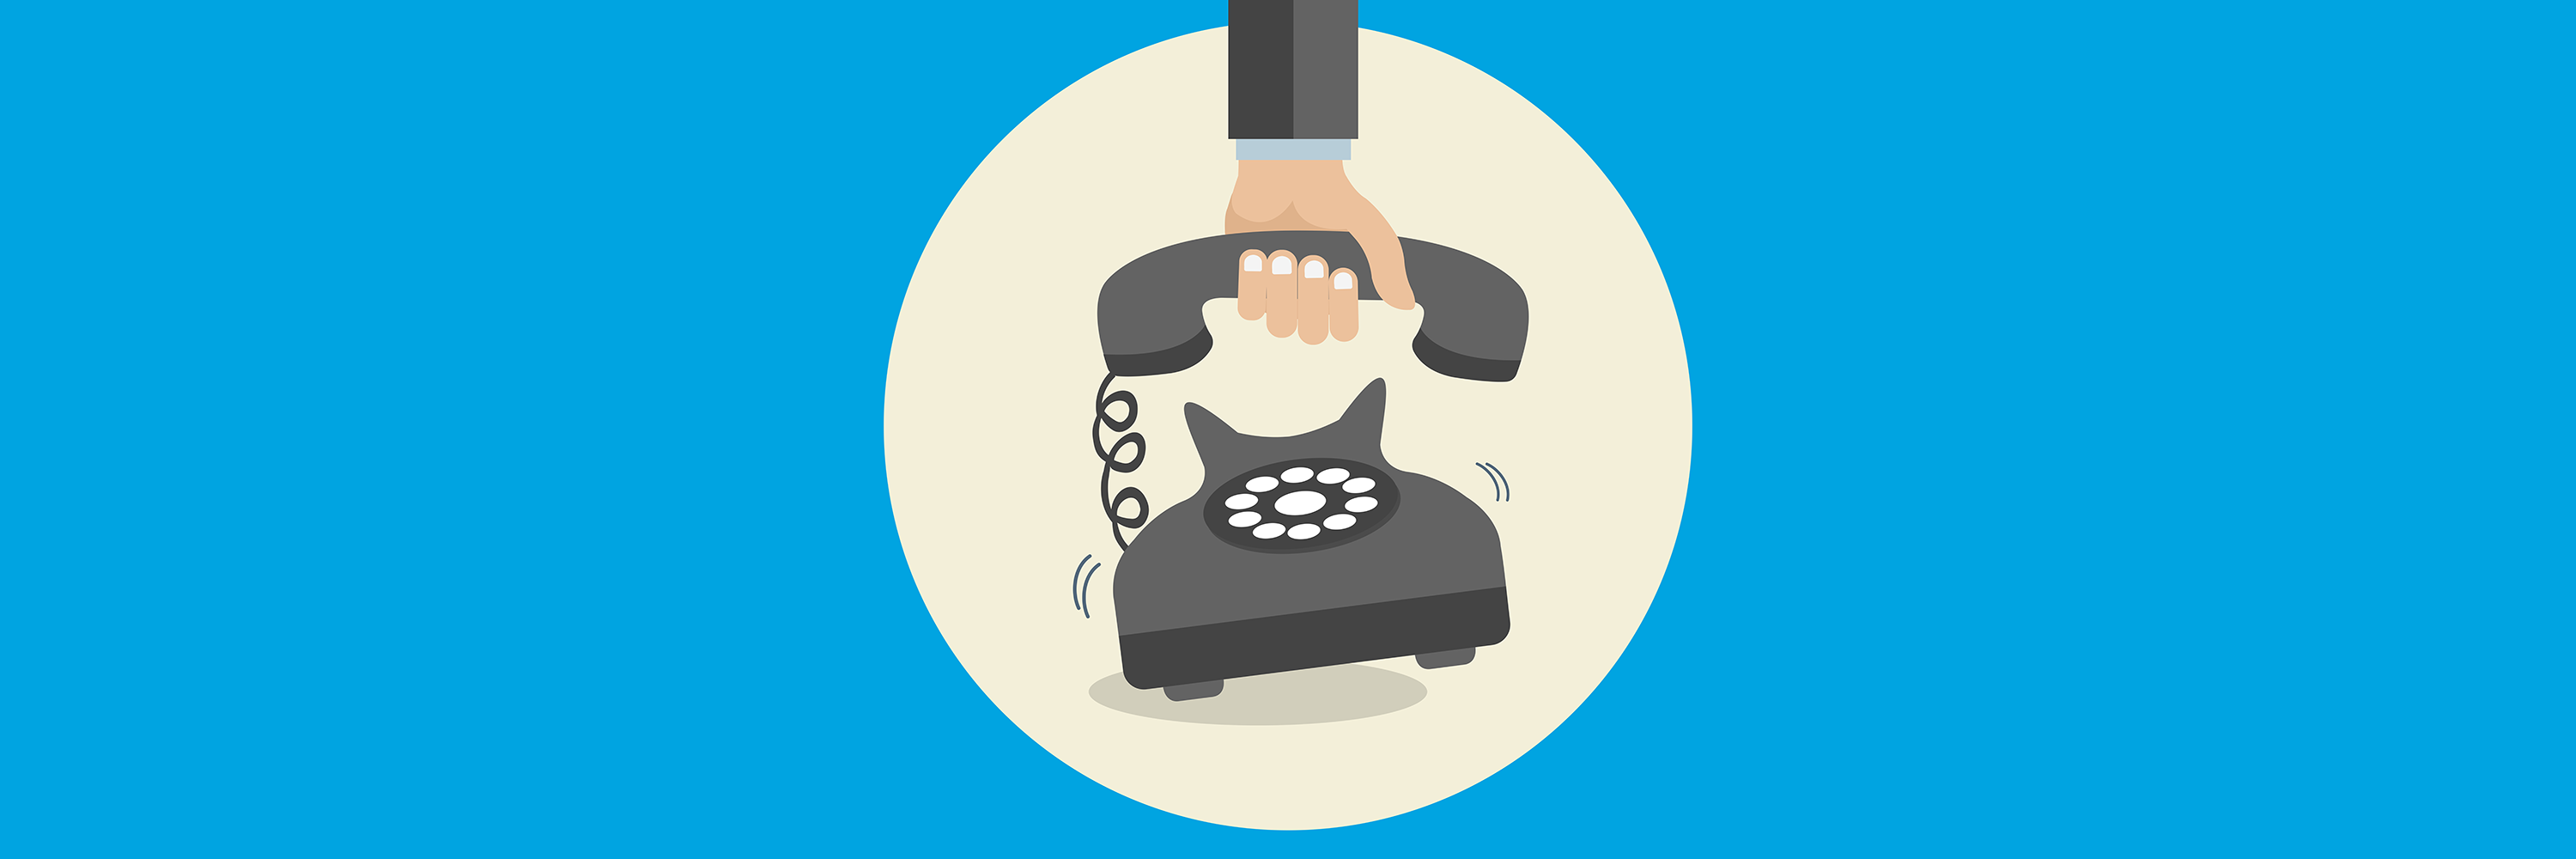 Parkinson's disease - tips for using the telephone